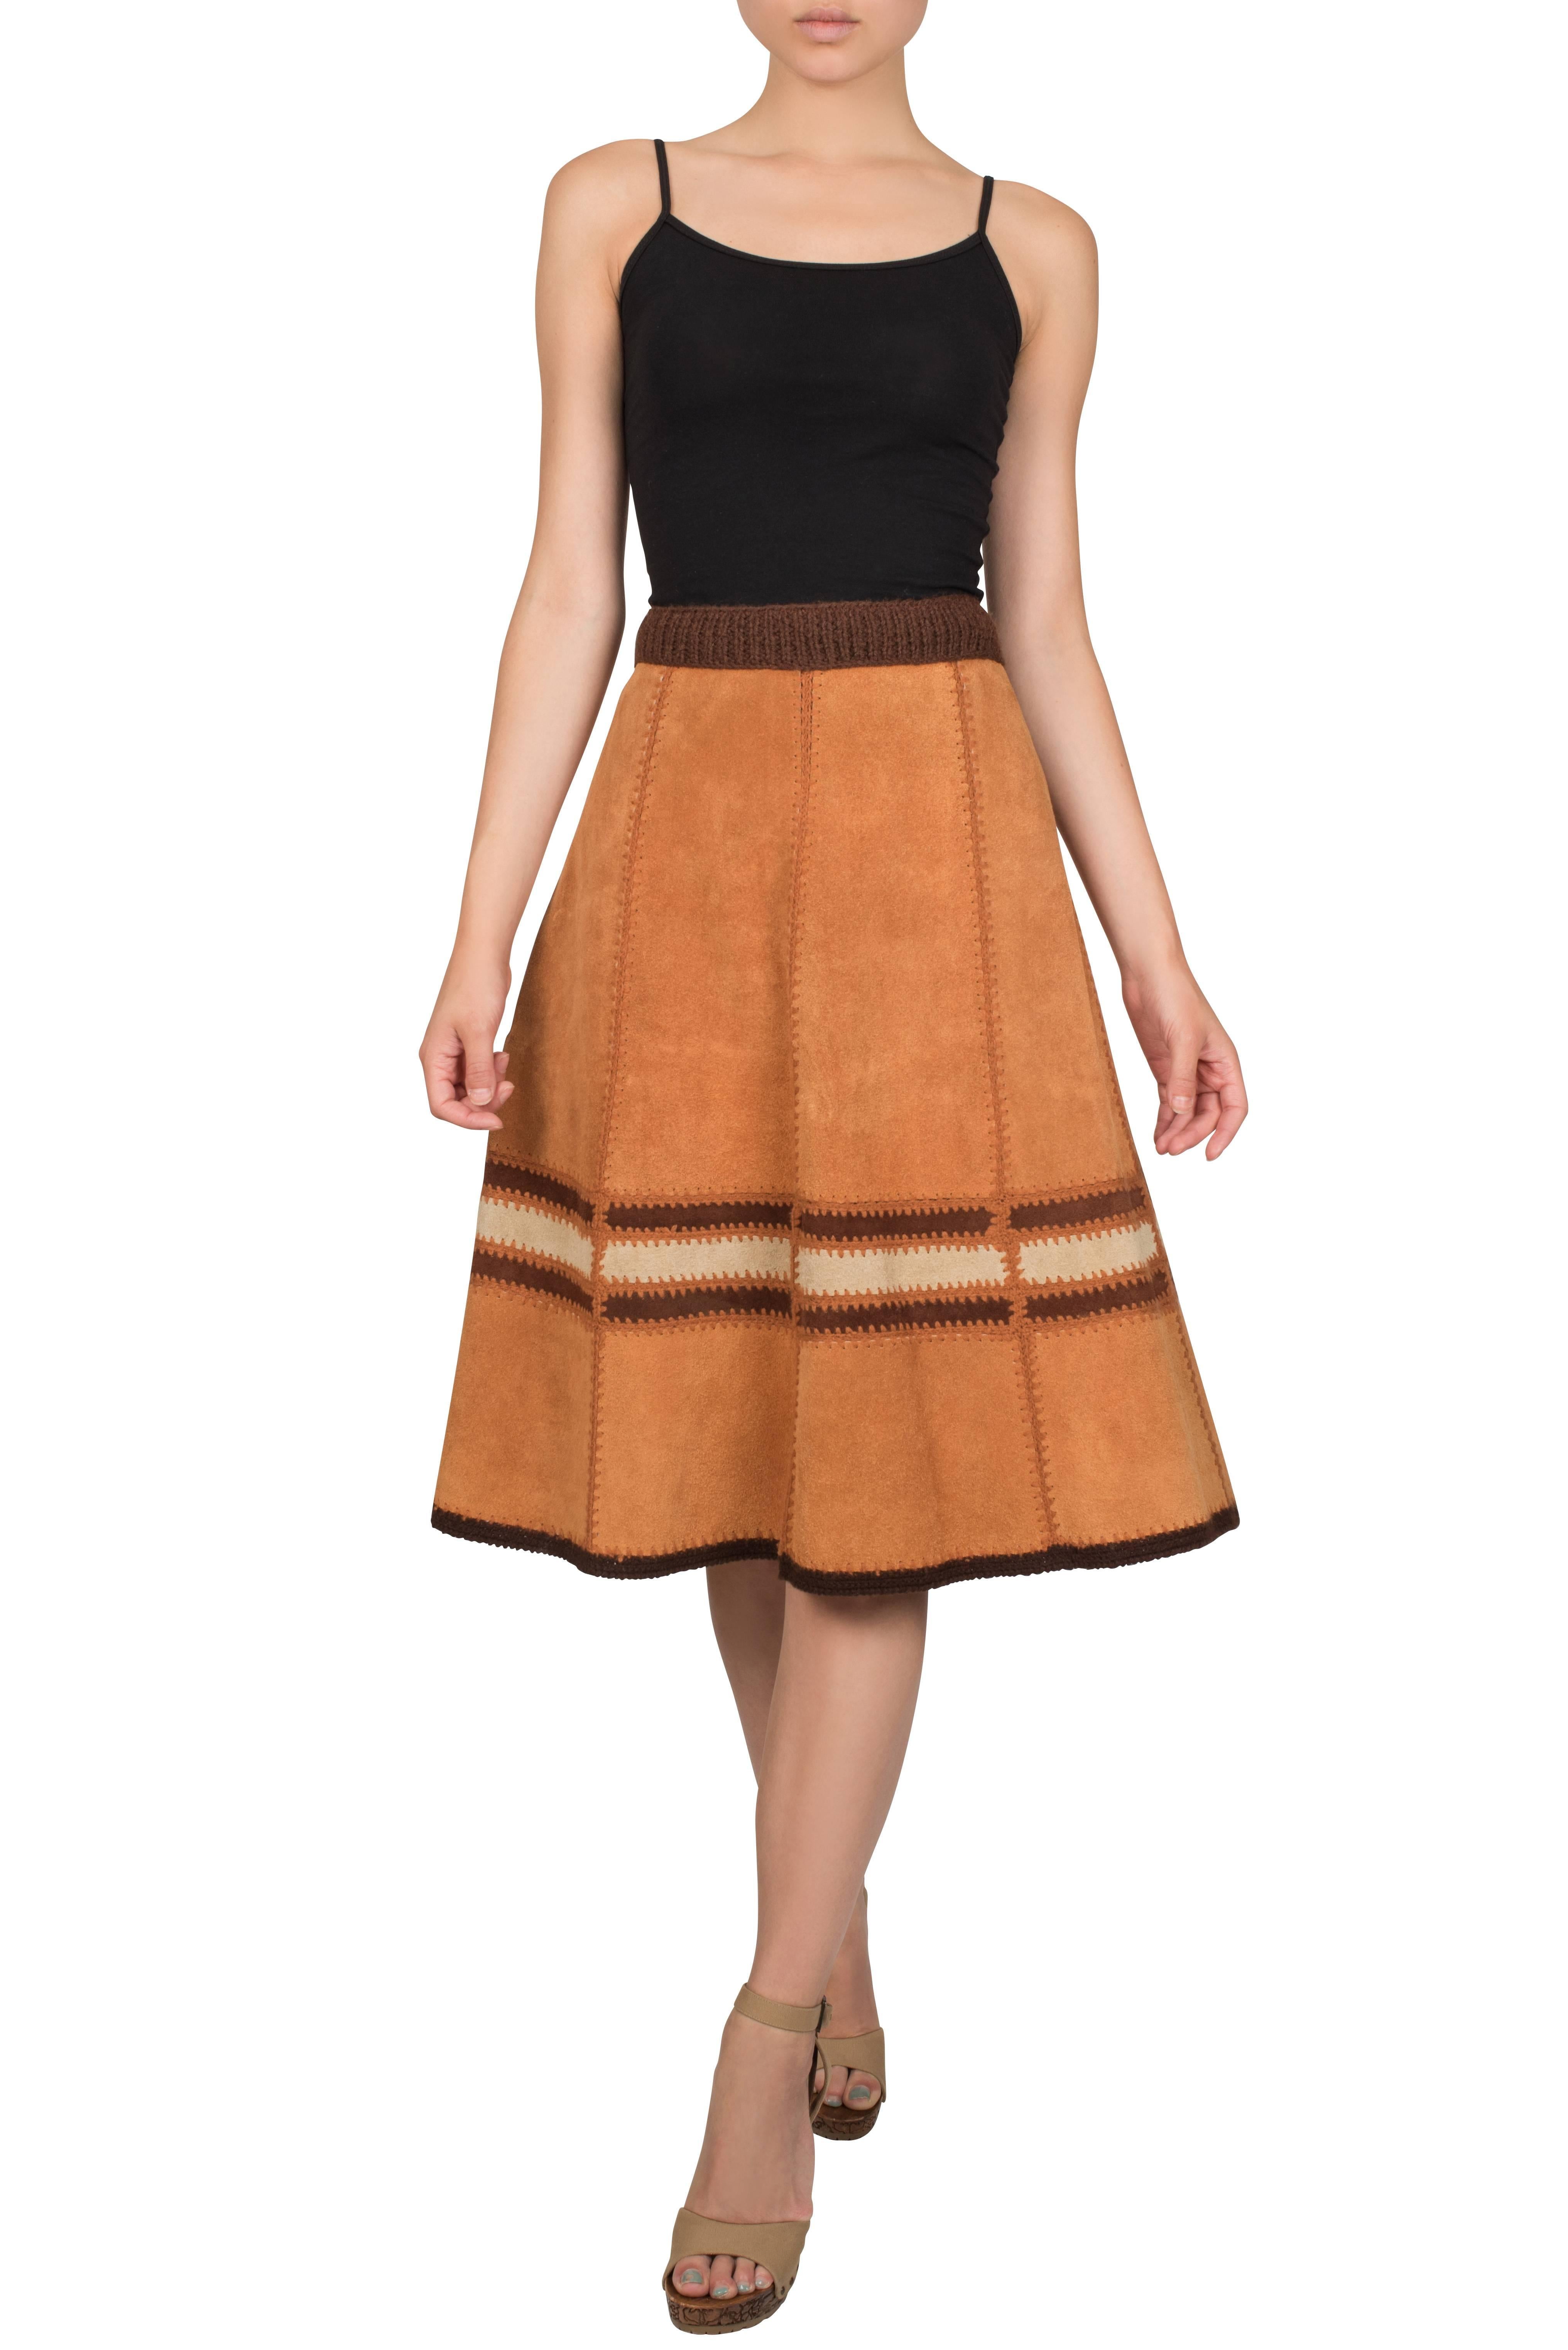 Western style caramel suede skirt made from panels which are stitched together in caramel colour thread. The waistband is made from a thick crochet band, which is also present at the edge of the hem. An off-white and brown insert embellishes the